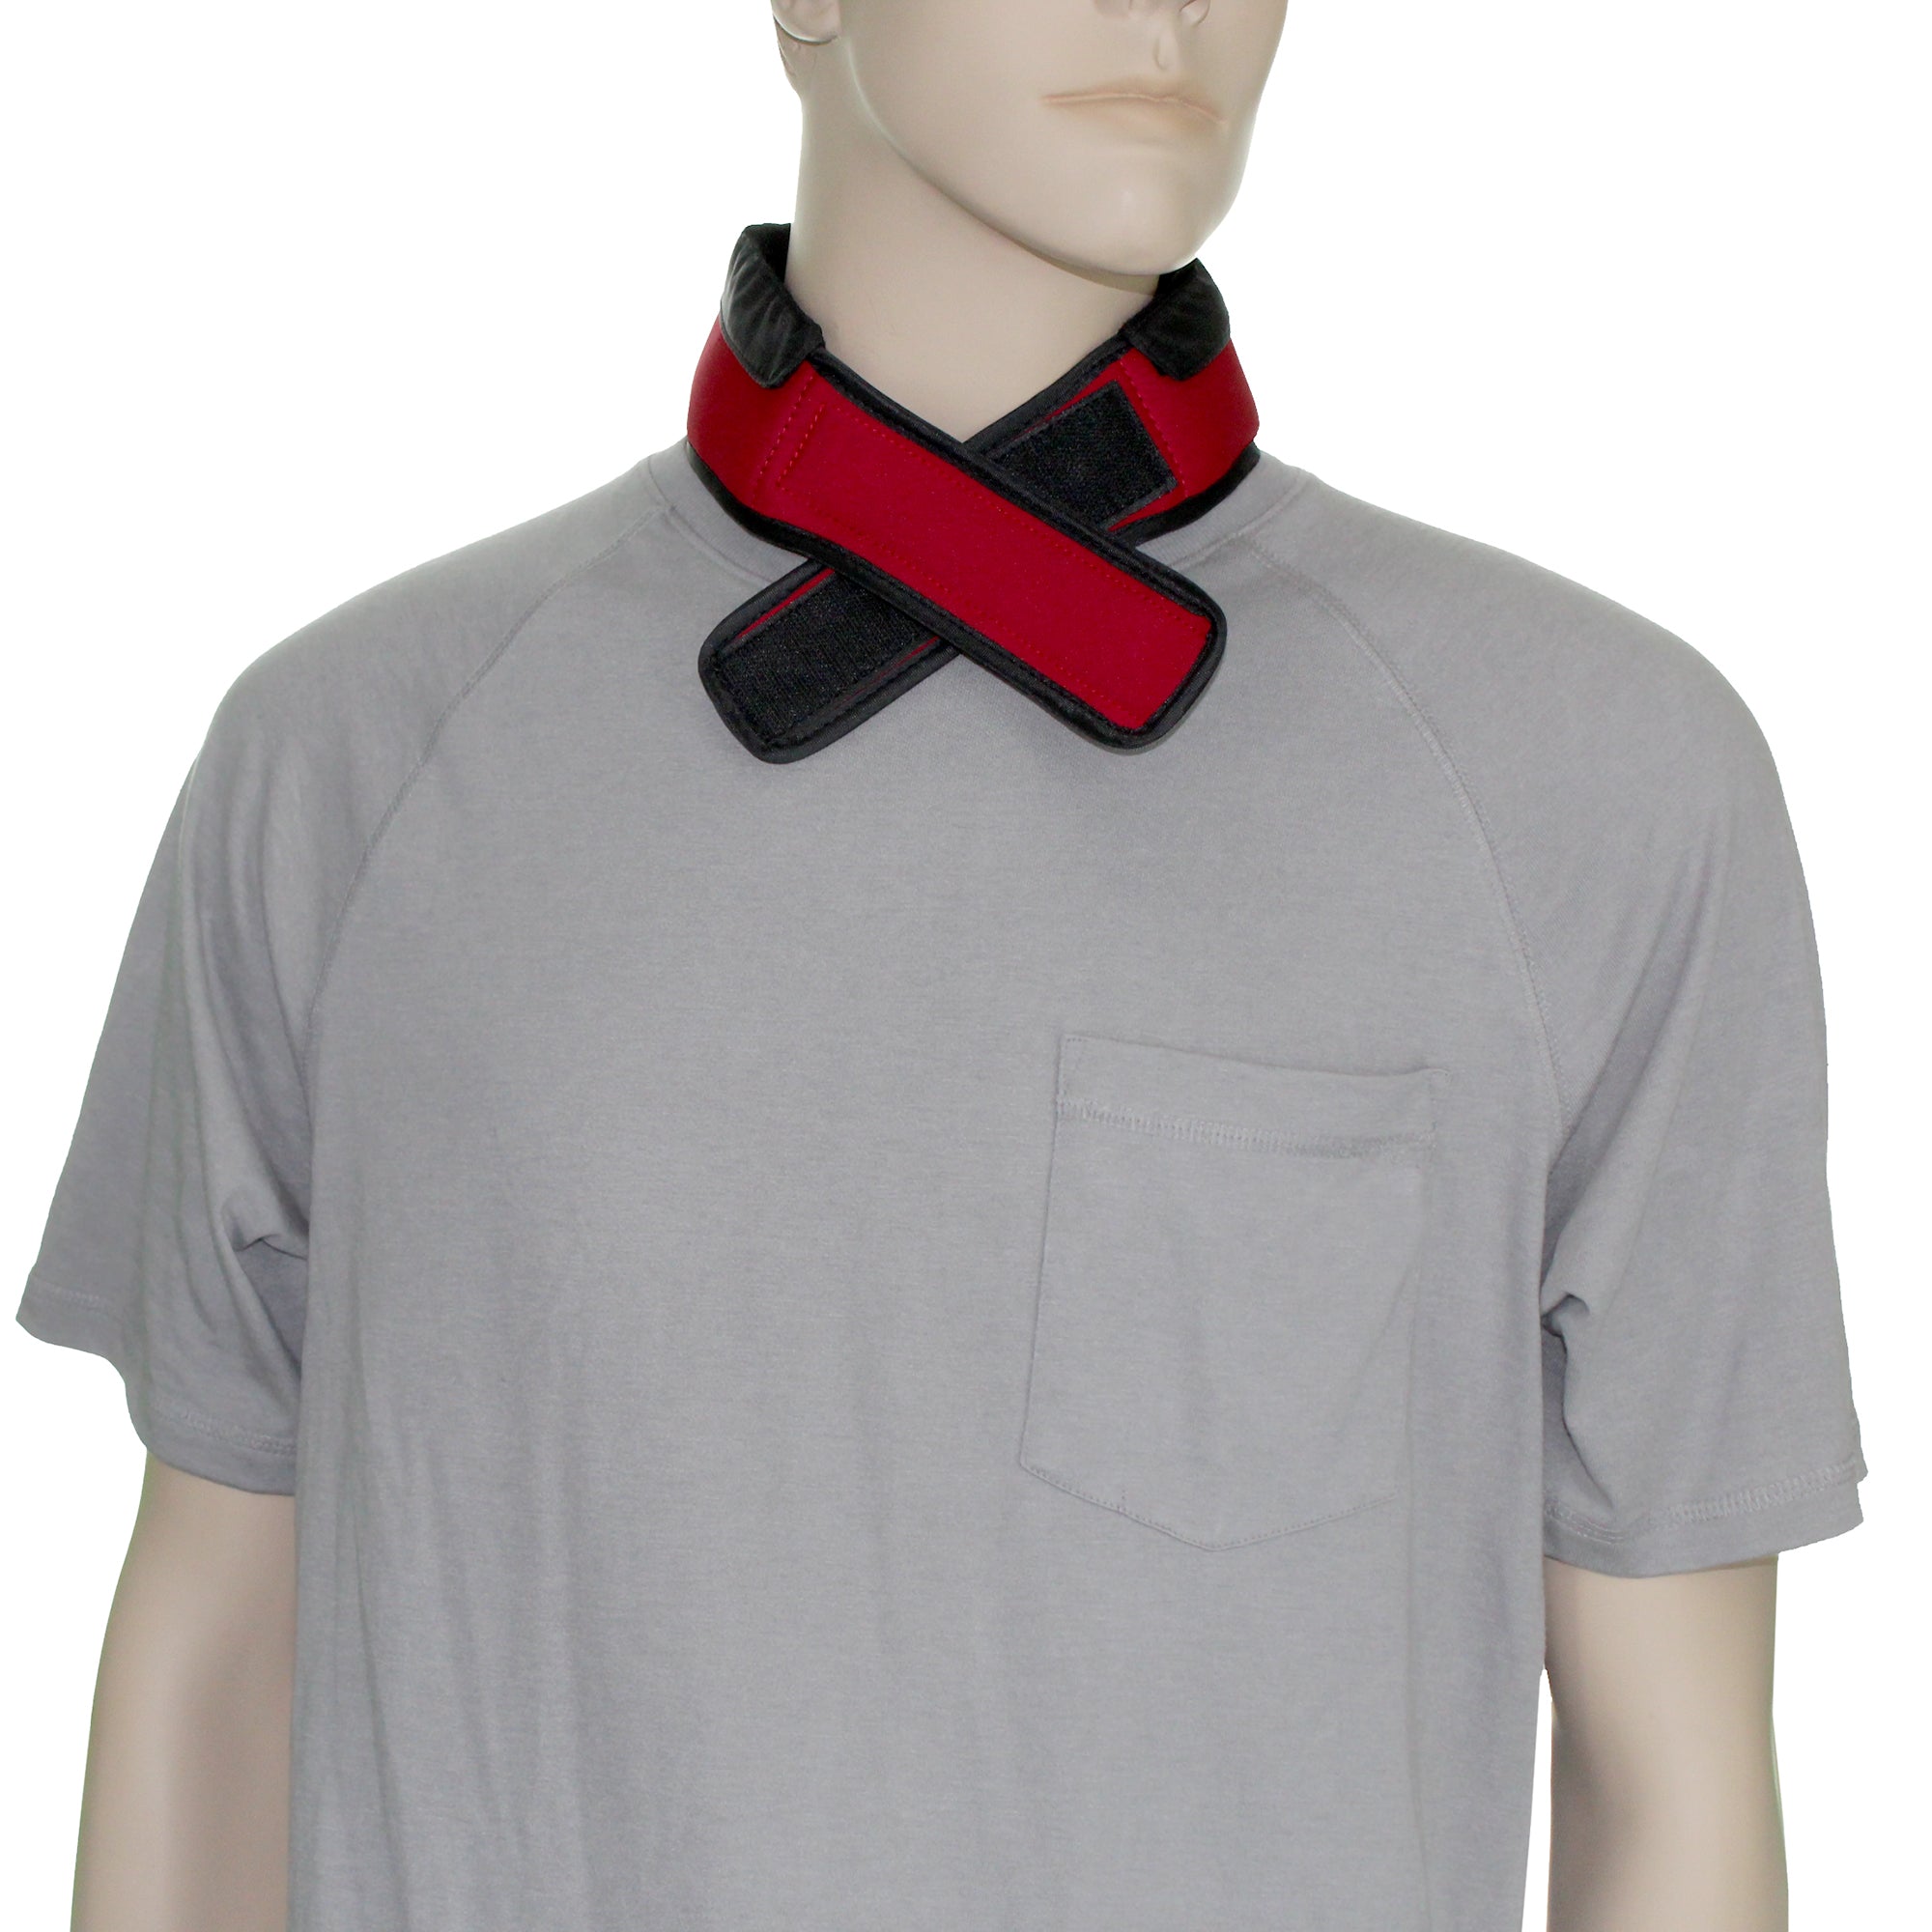 FlexiFreeze Cooling Collar, red, on mannequin